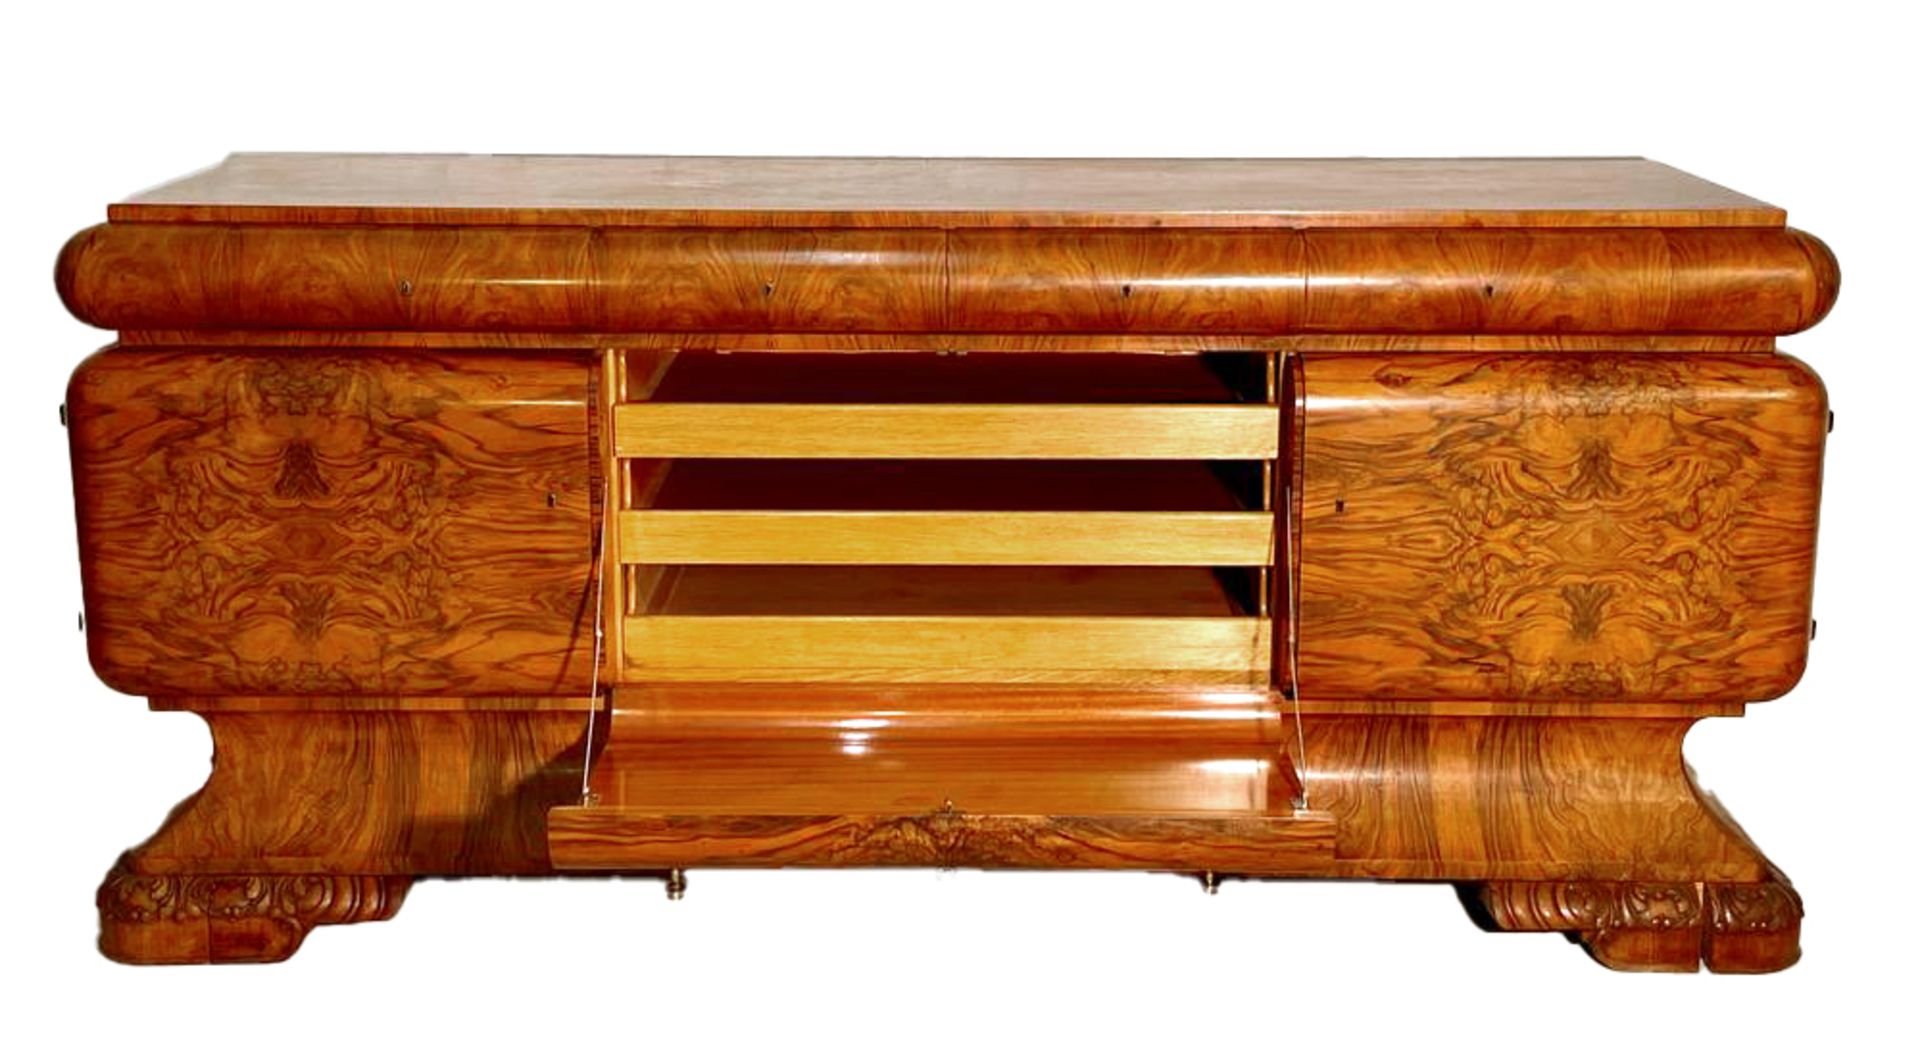 Art-déco sideboard from around 1930, burr walnut veneer, 113 x 250 x 66 cm - The furniture cannot be - Image 2 of 2